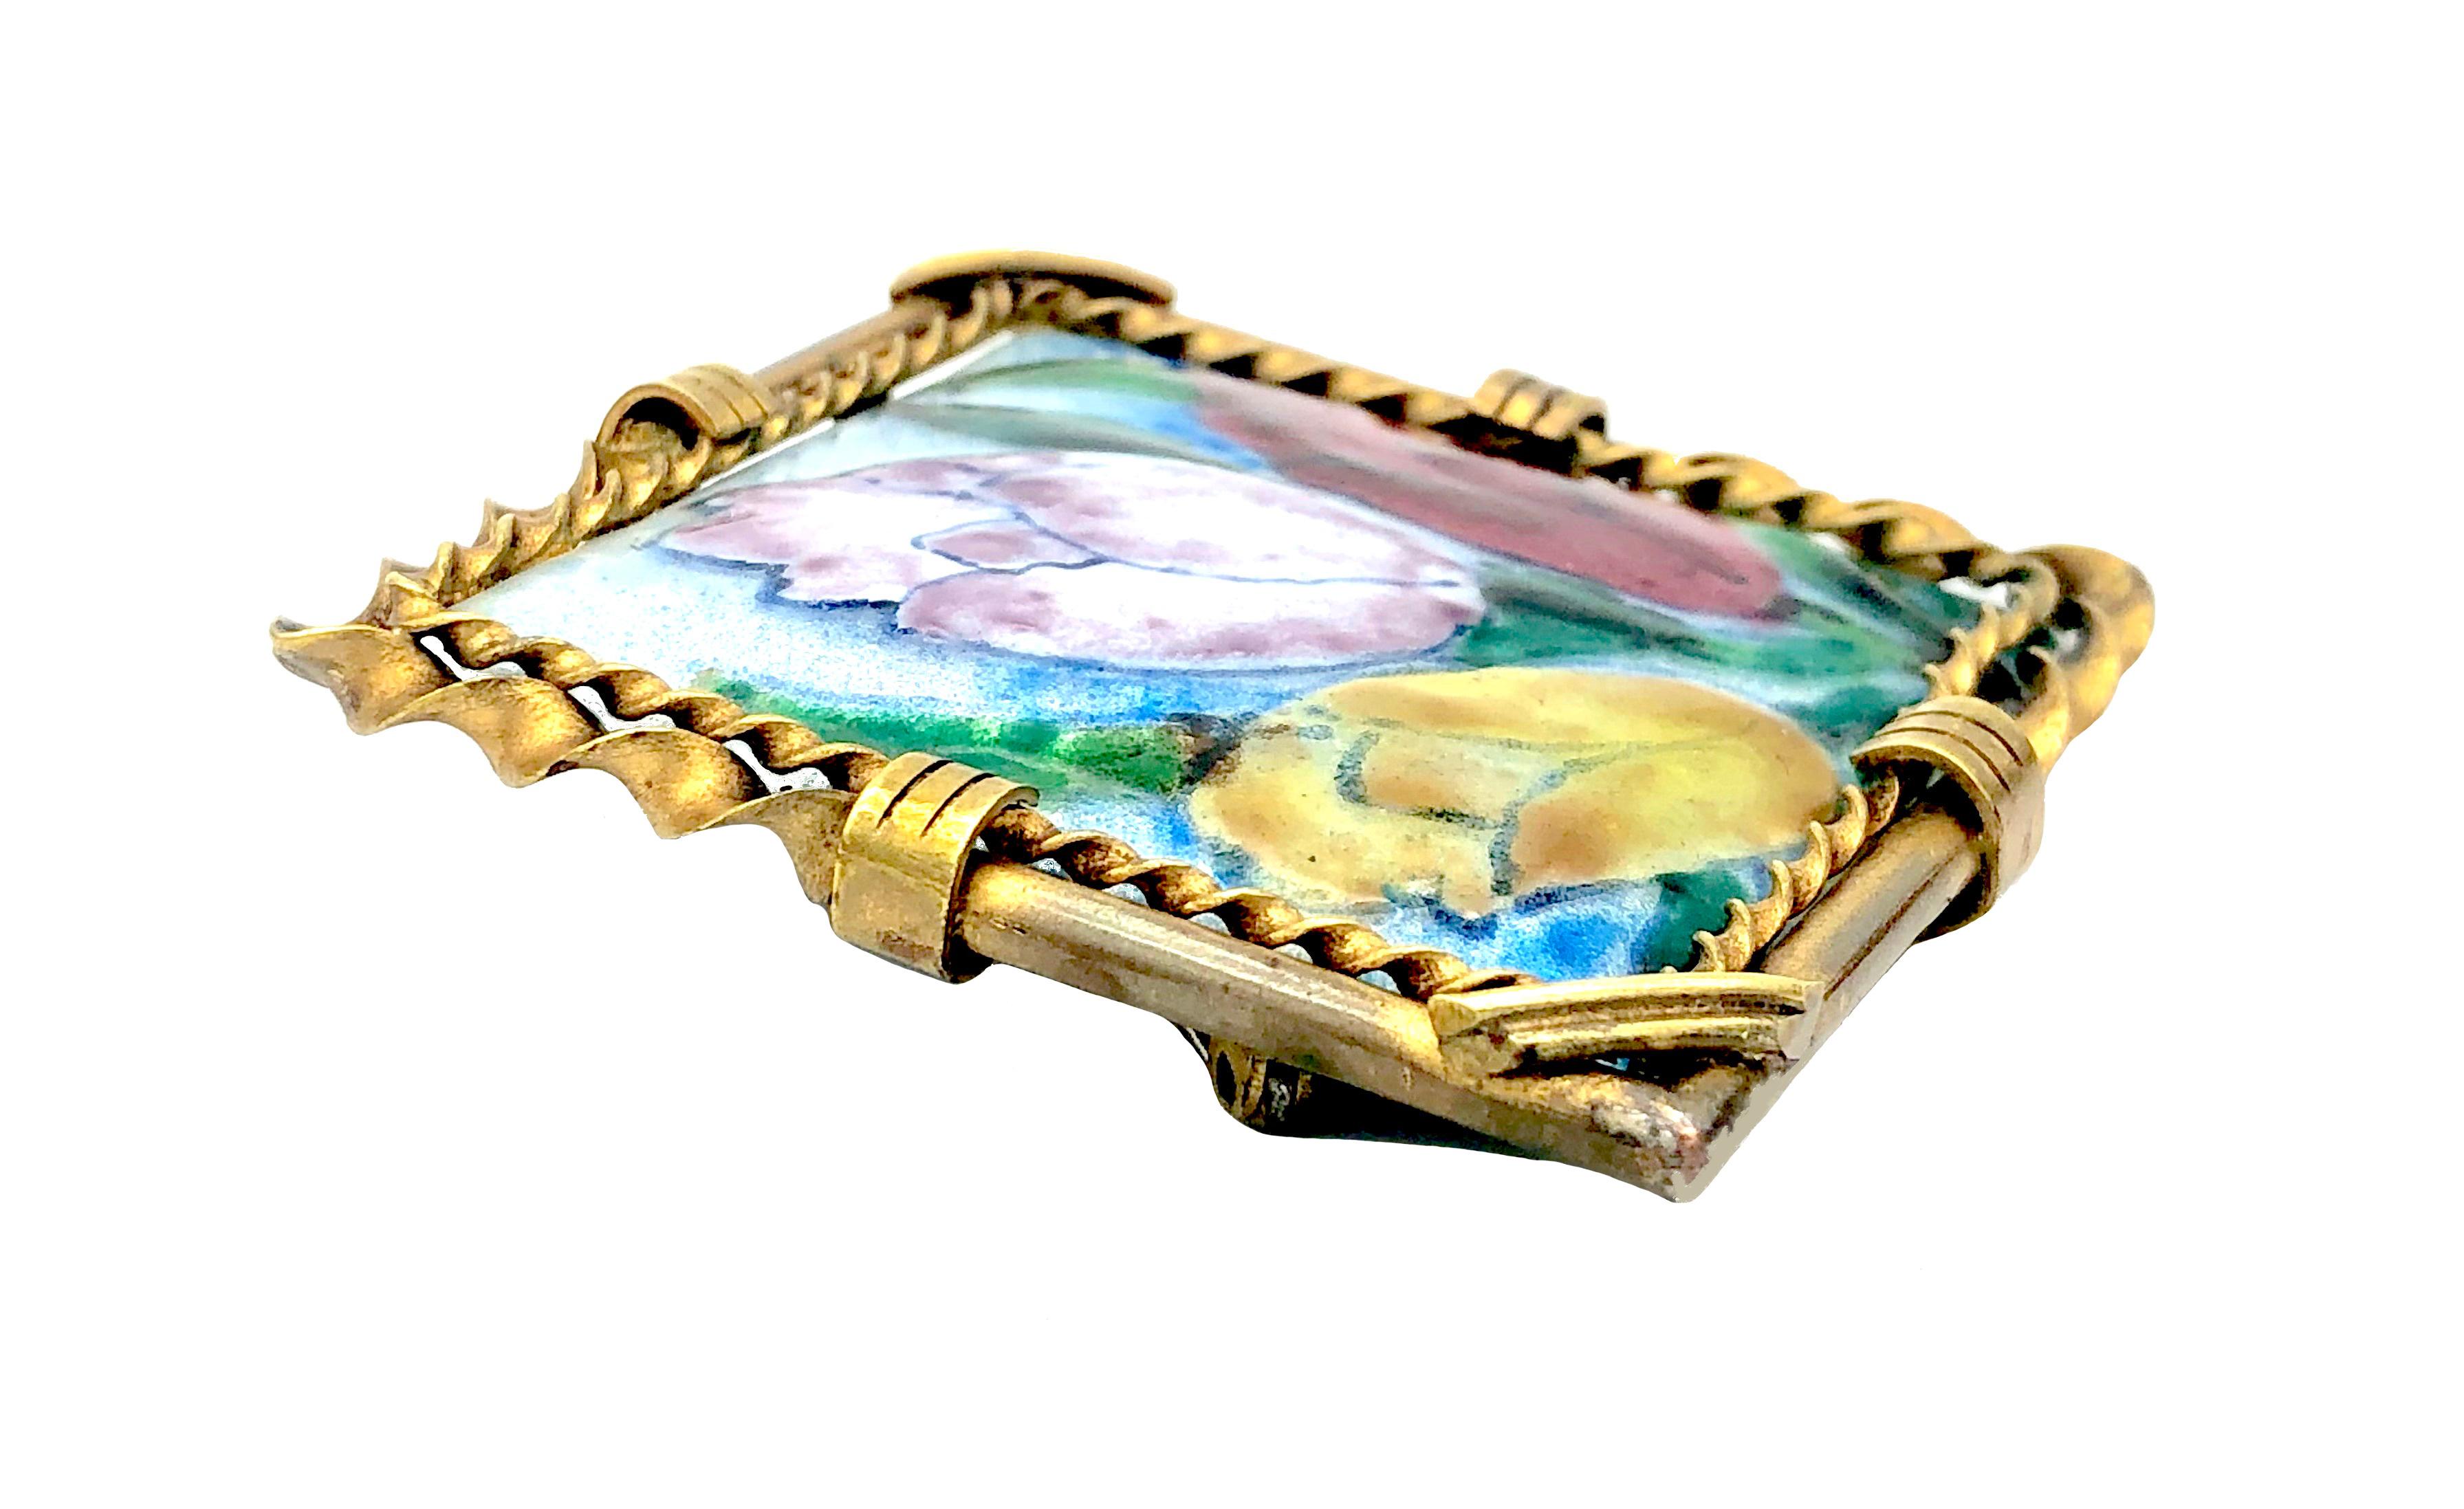 Antique Art Deco Brooch Tulips Polychrome Enamel Painting on Copper Brass Frame In Good Condition For Sale In Munich, Bavaria